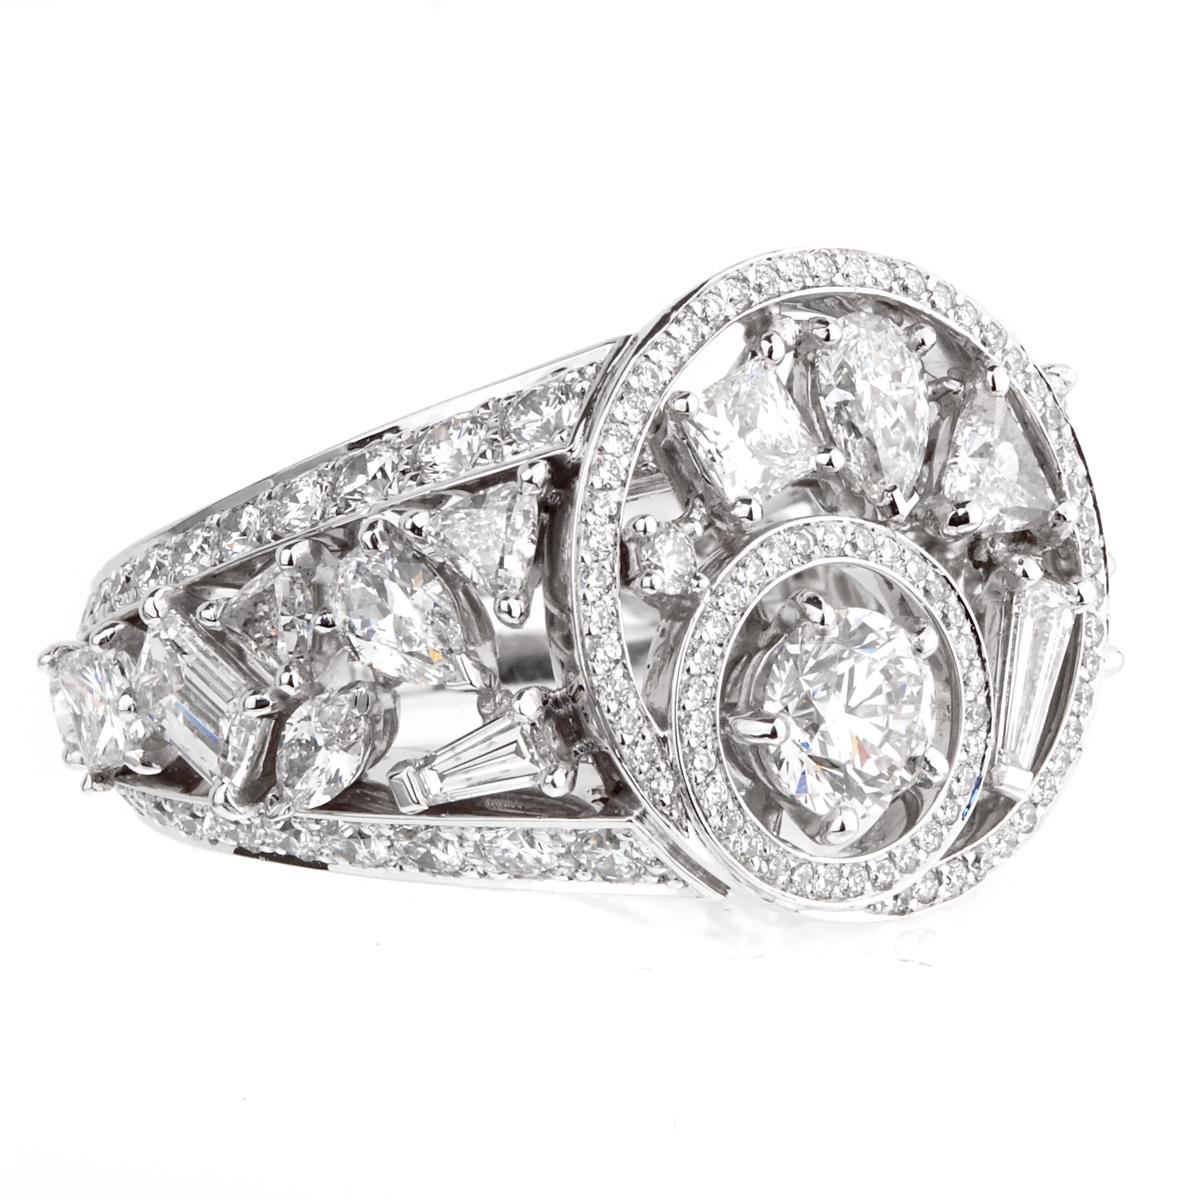 A wonderful piece of art by Chanel from the Cosmos collection featuring a multitude of round diamonds with delicately placed emerald cut, baguette, pear shape, princess cut and trillion cut diamonds set in 18k white gold. The round brilliant cut